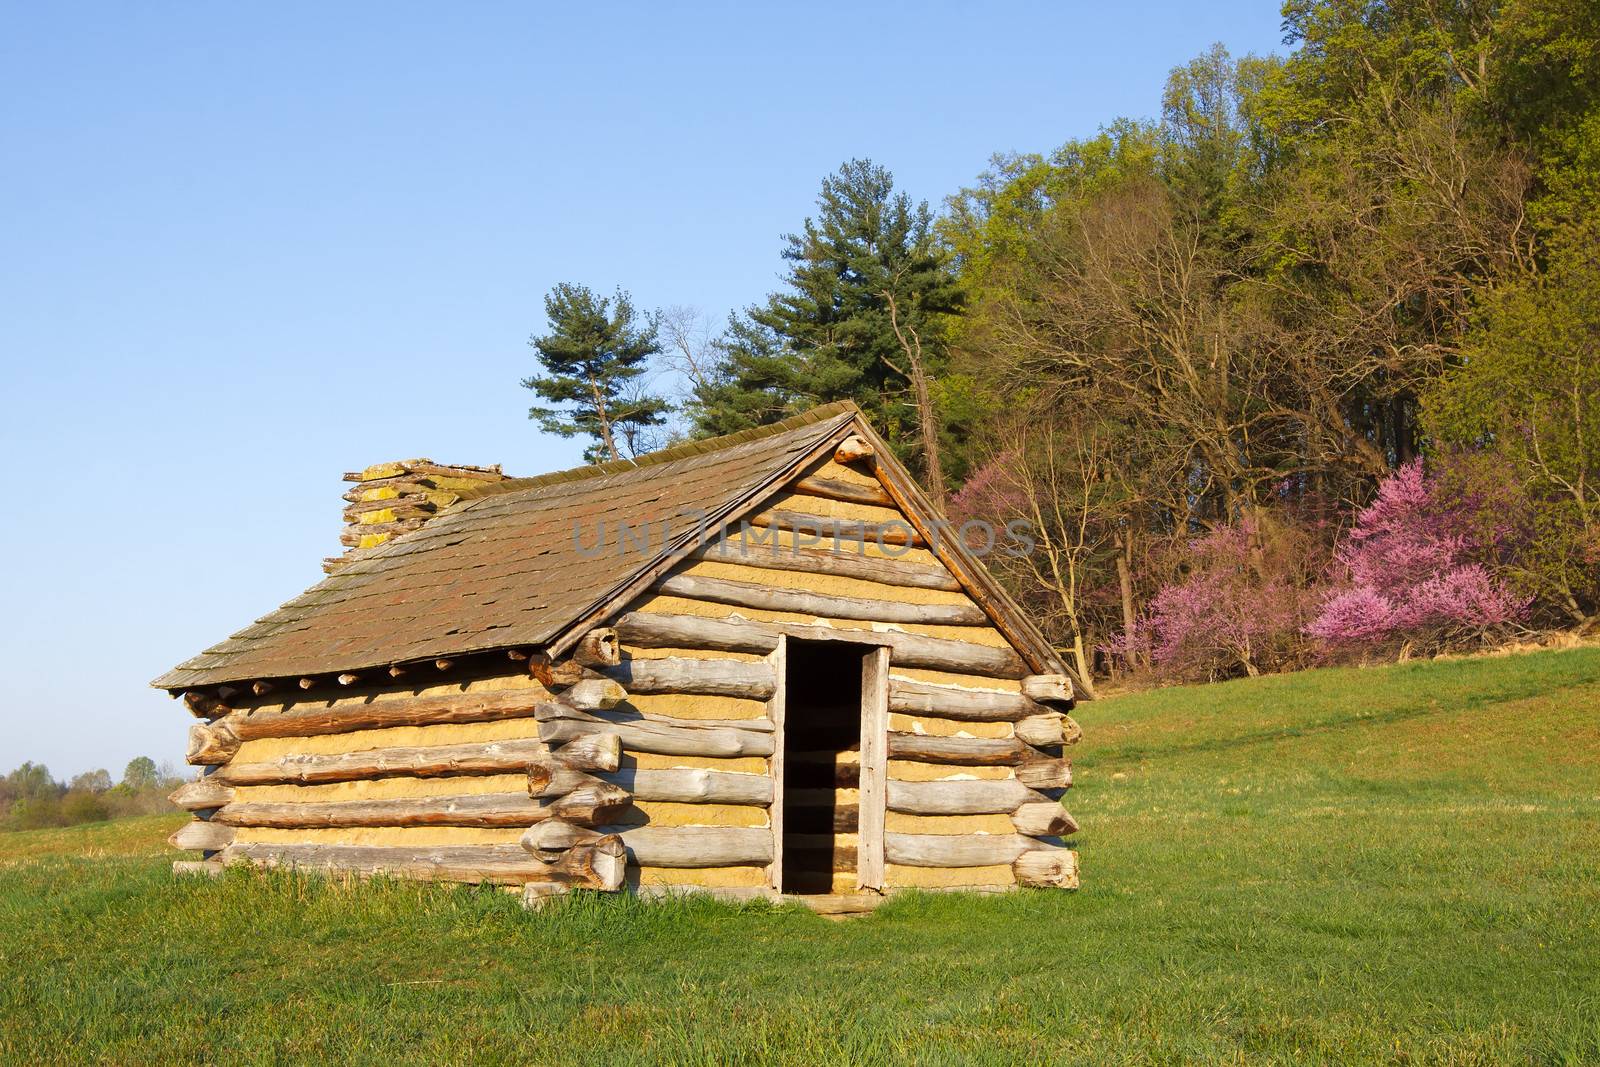  A reproduction of cabins used by Revolutionary War soldiers during the winter of 1777-78 under the command of George Washington. Located in Valley Forge National Historic Park, Pennsylvania, USA.










 

 
 



 



 
